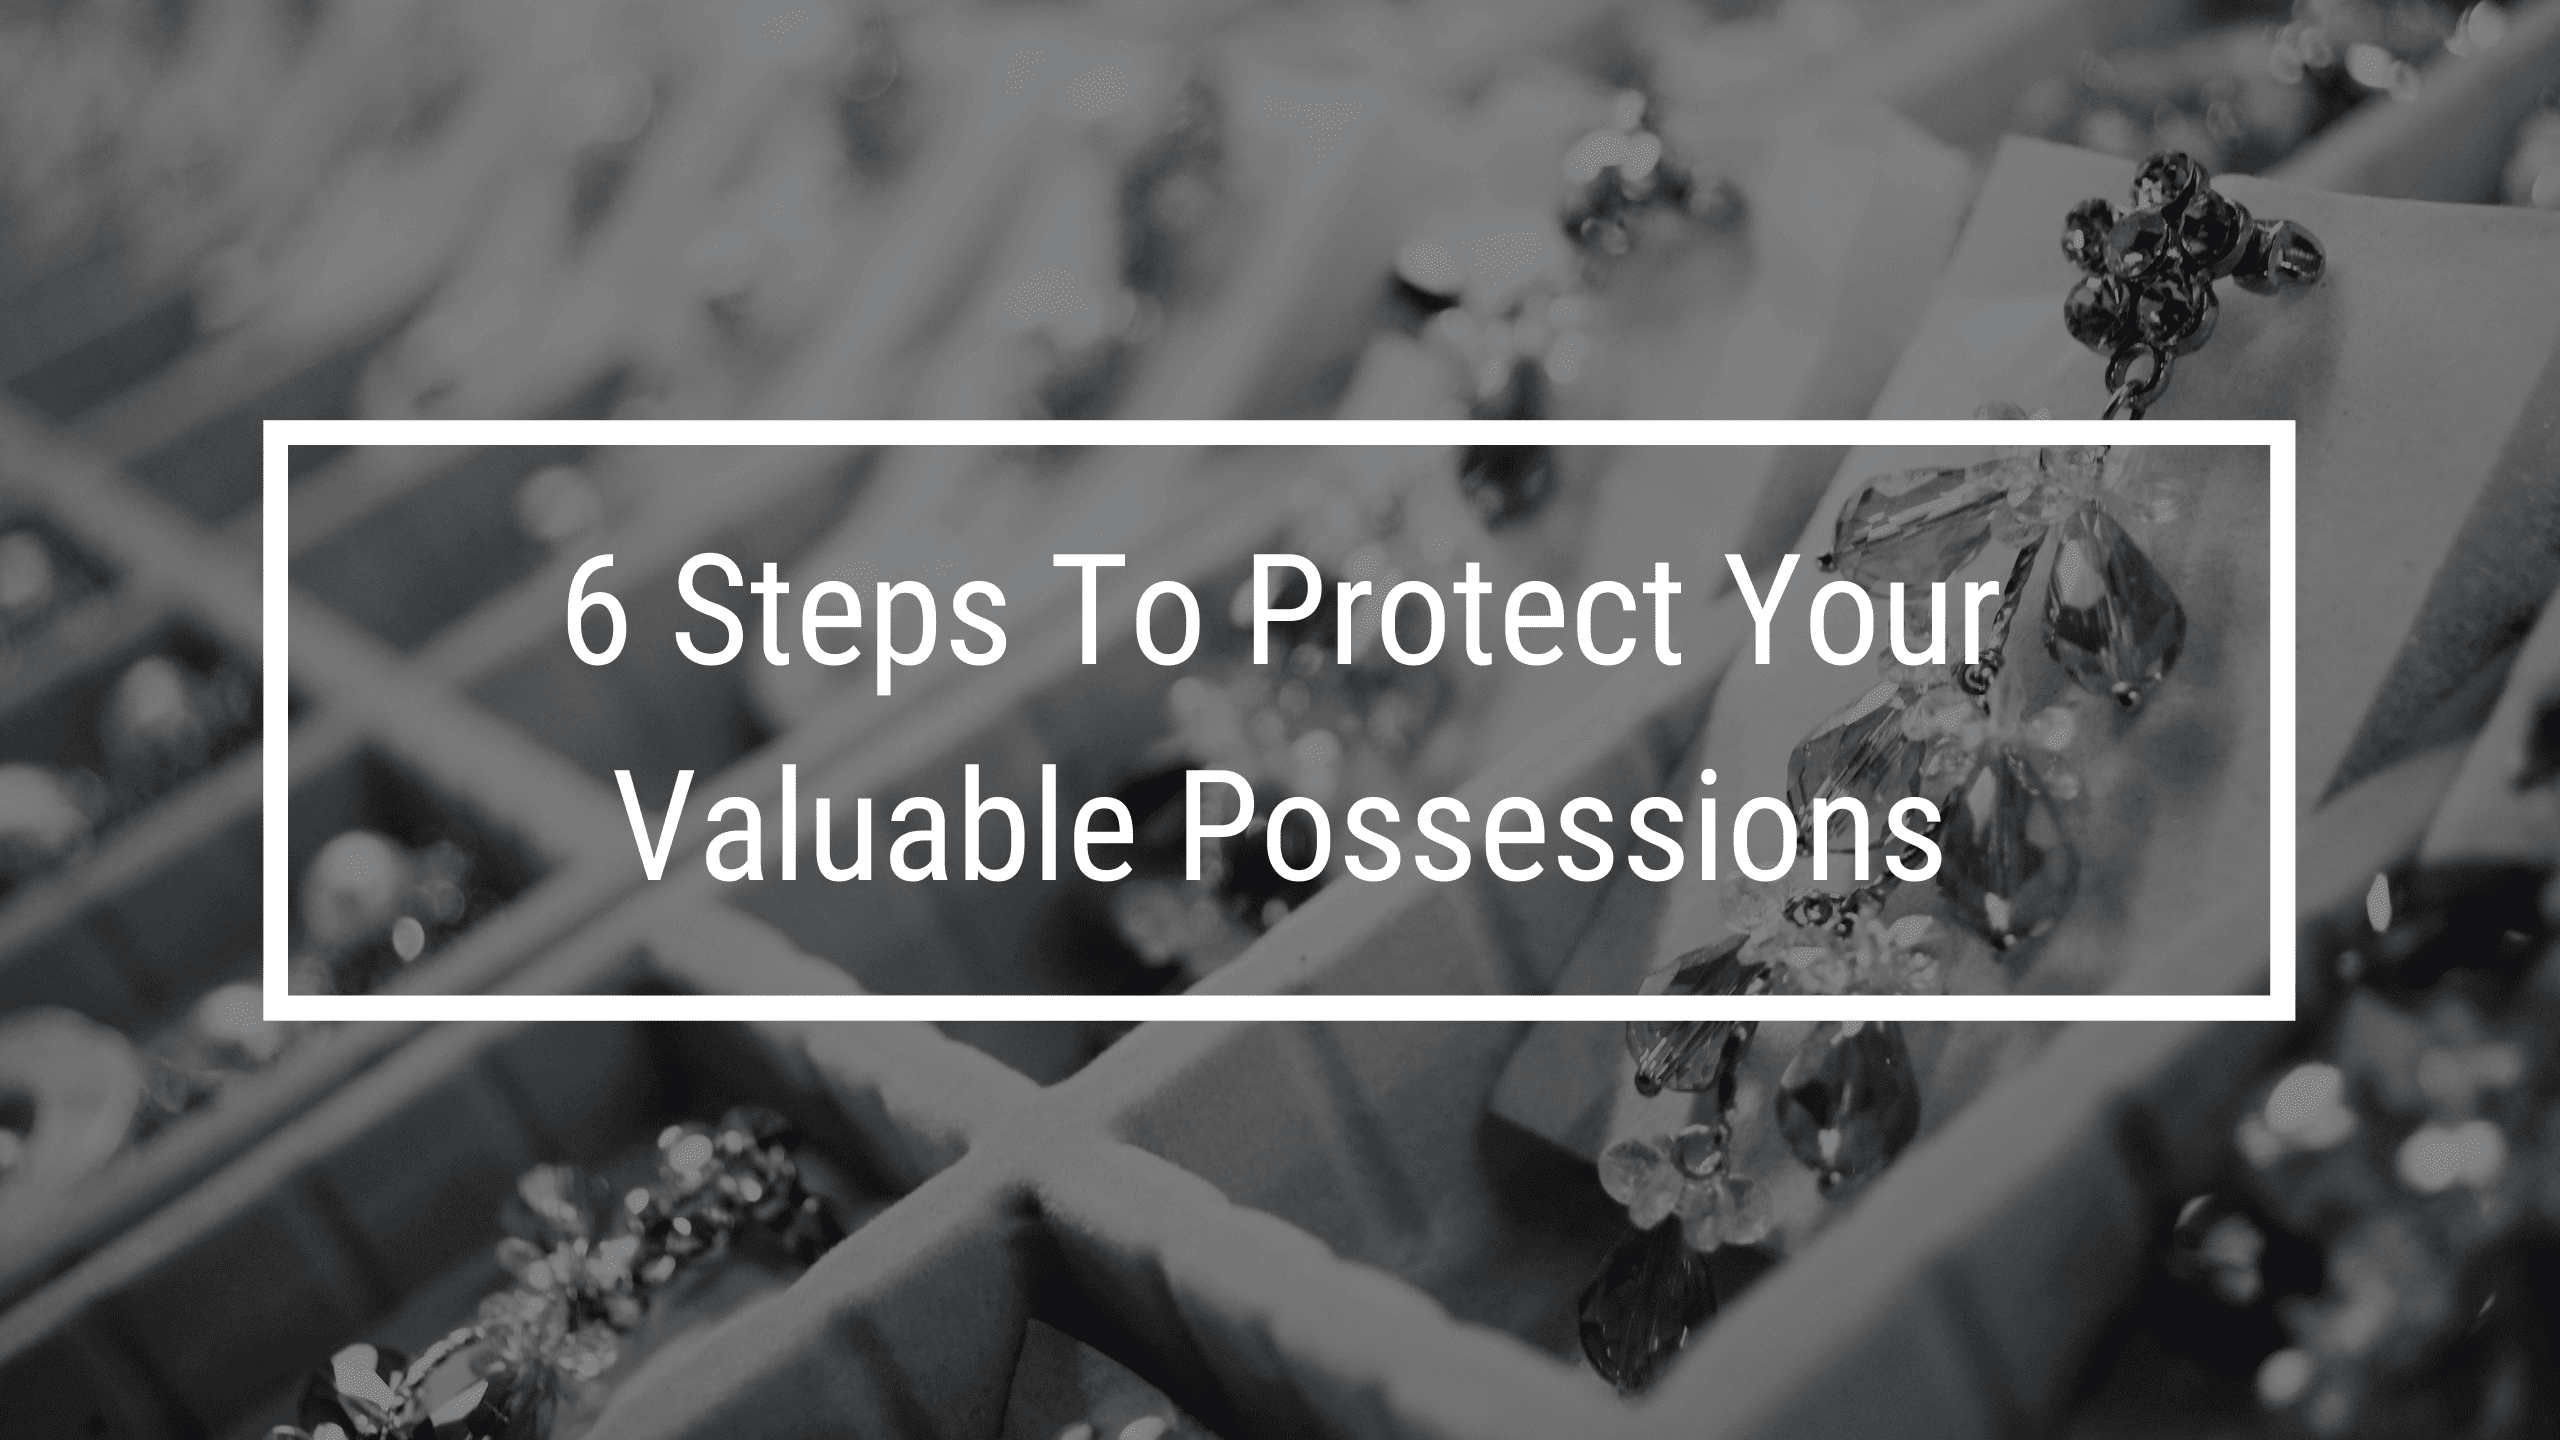 6 steps to protecting your valuable possessions. Valuable jewelry in background of image.